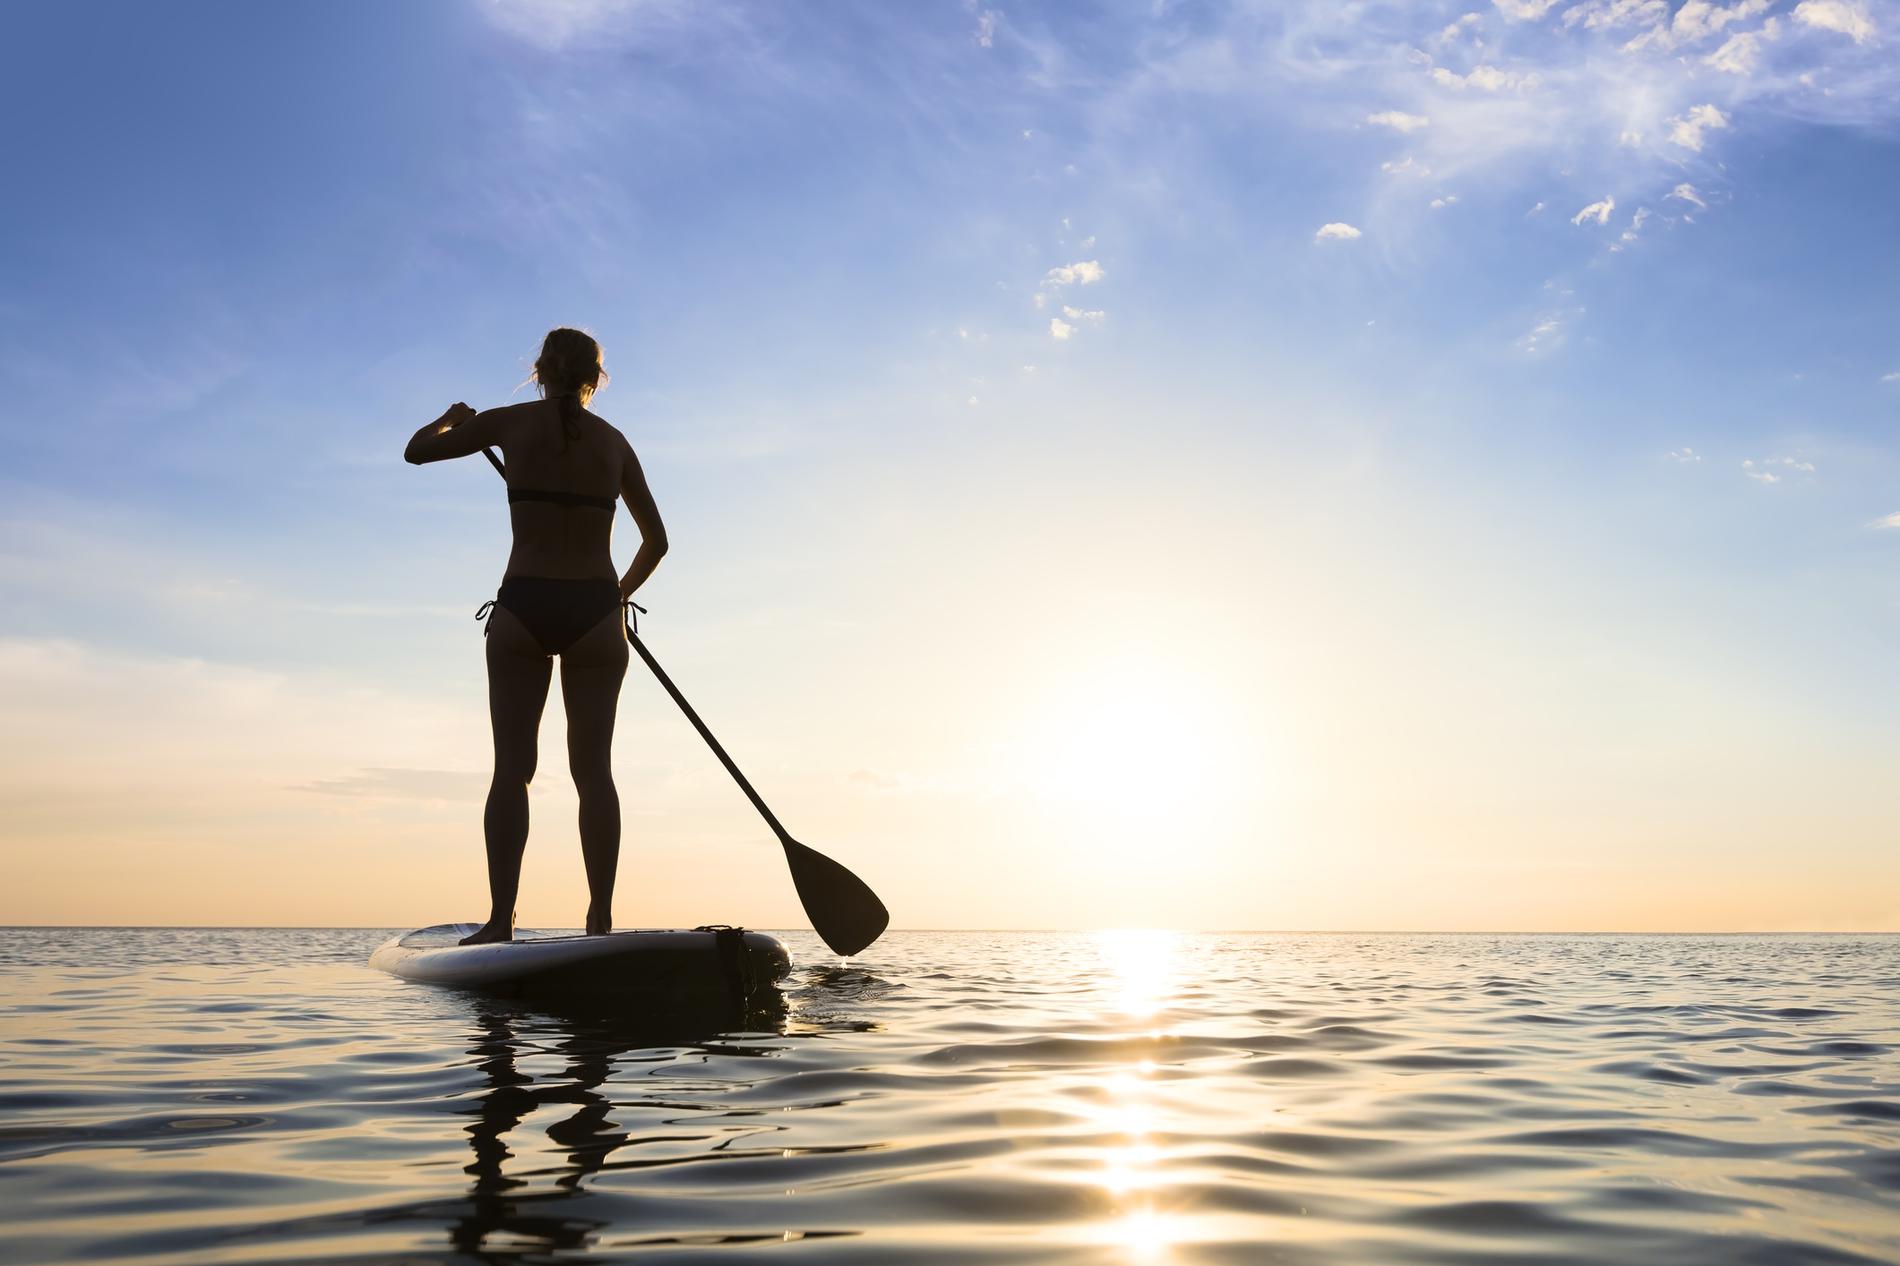 a picture of stand up paddle boarding tv